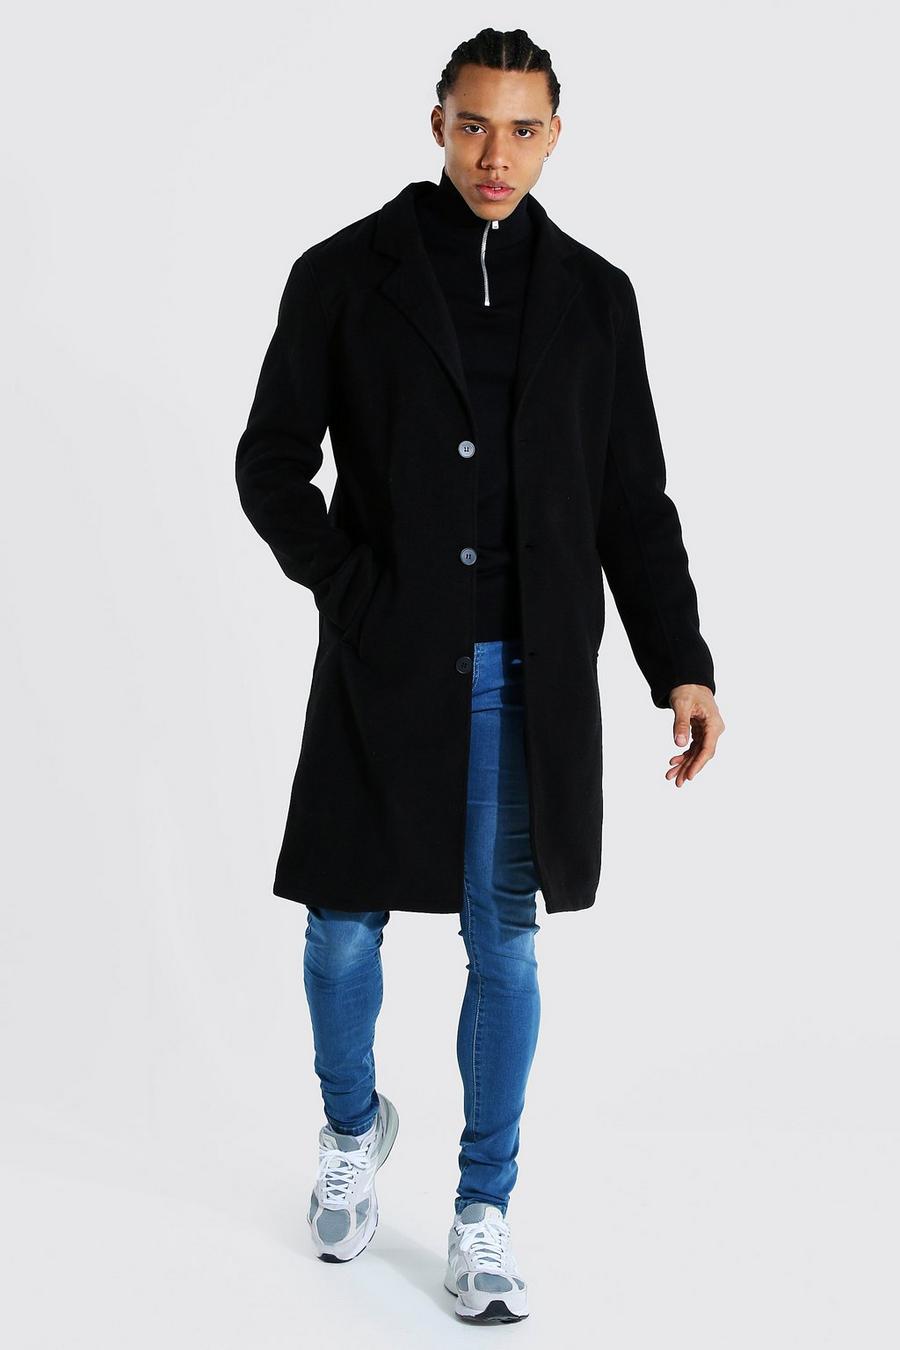 The MAN Collection | boohoo UK